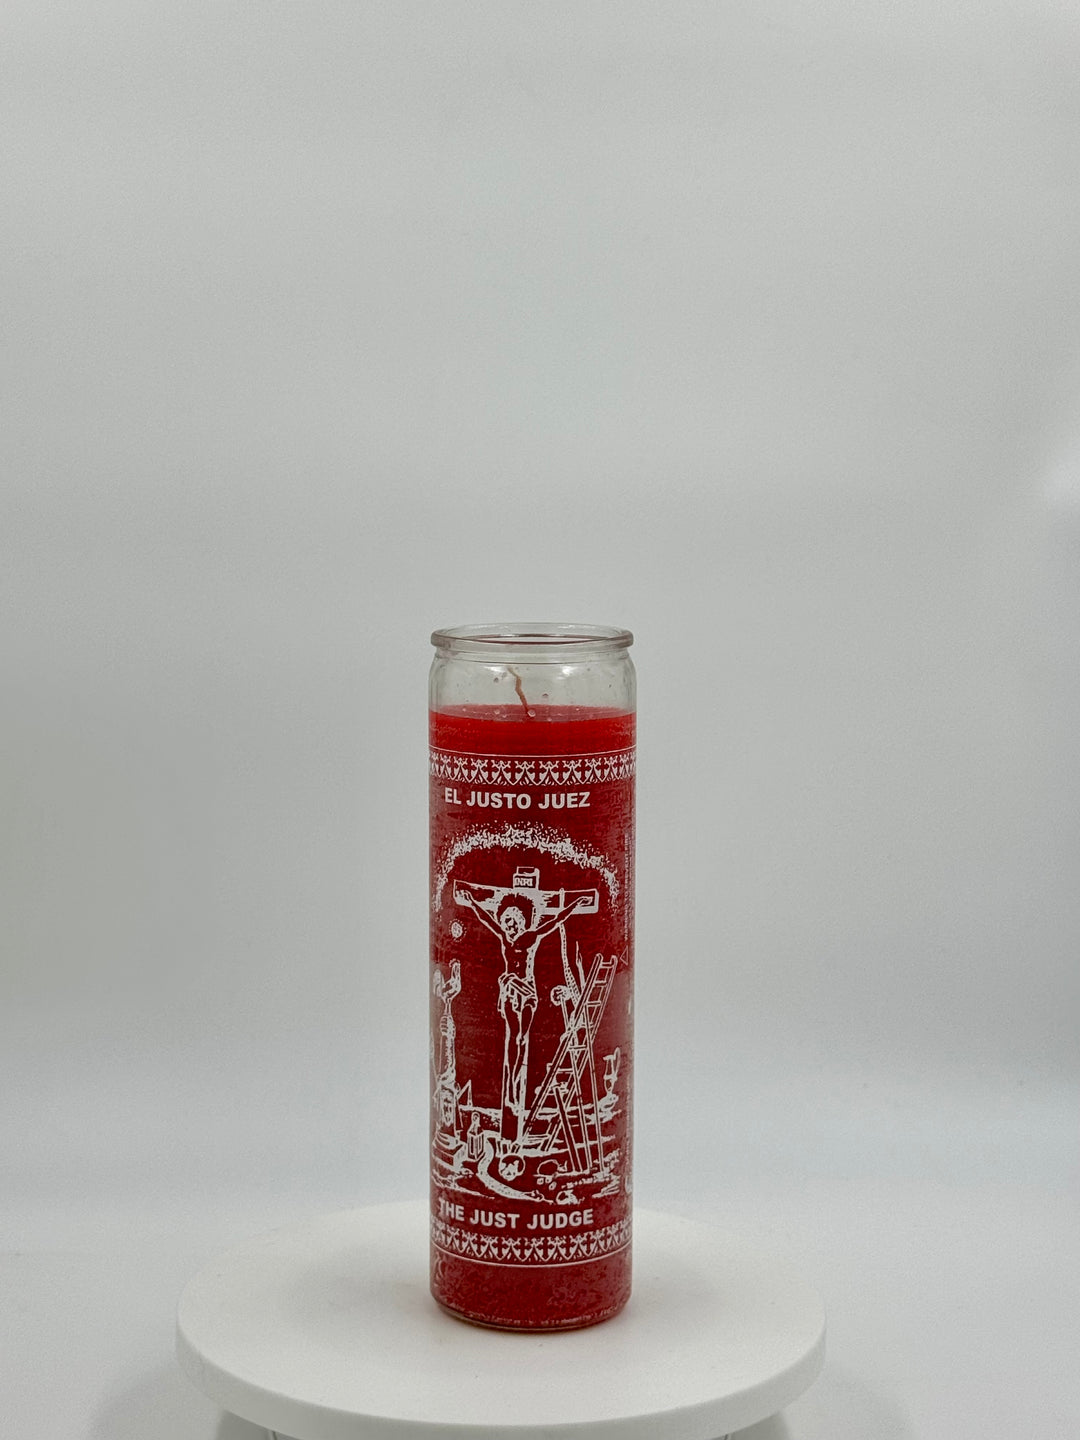 JUST JUDGE (JUSTO JUEZ) RED -Candle/Vela